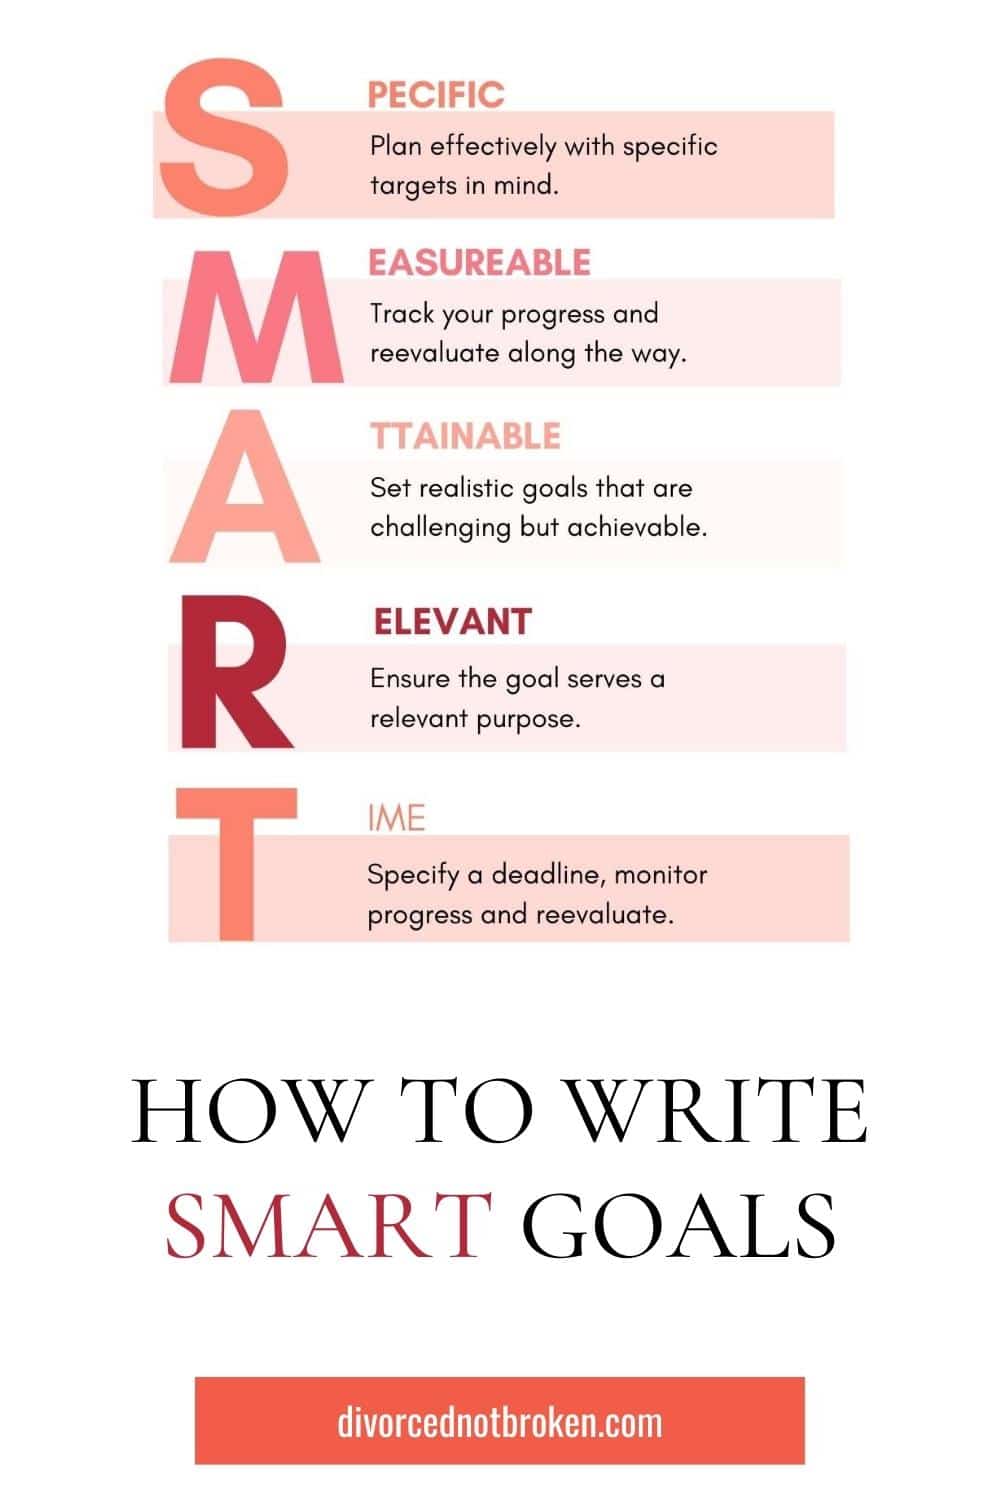 SMART Goals graphic image with descriptions and title graphic across the bottom.